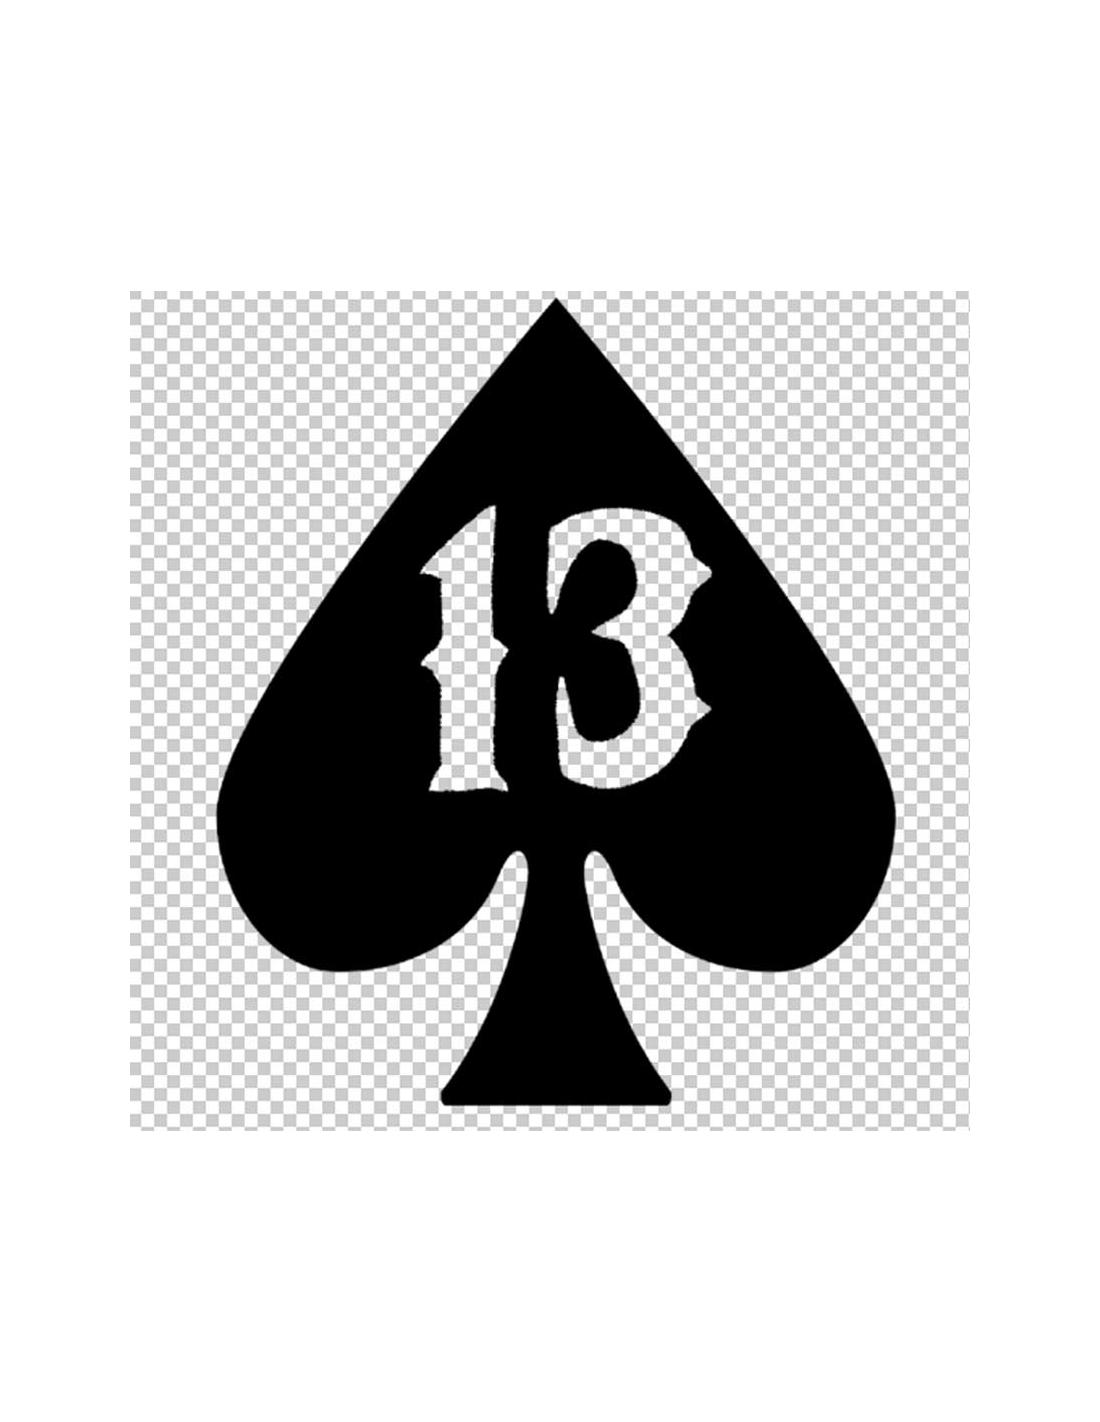 DECAL UV 13 AND ACE OF SPADES BLACK 6X7 CM